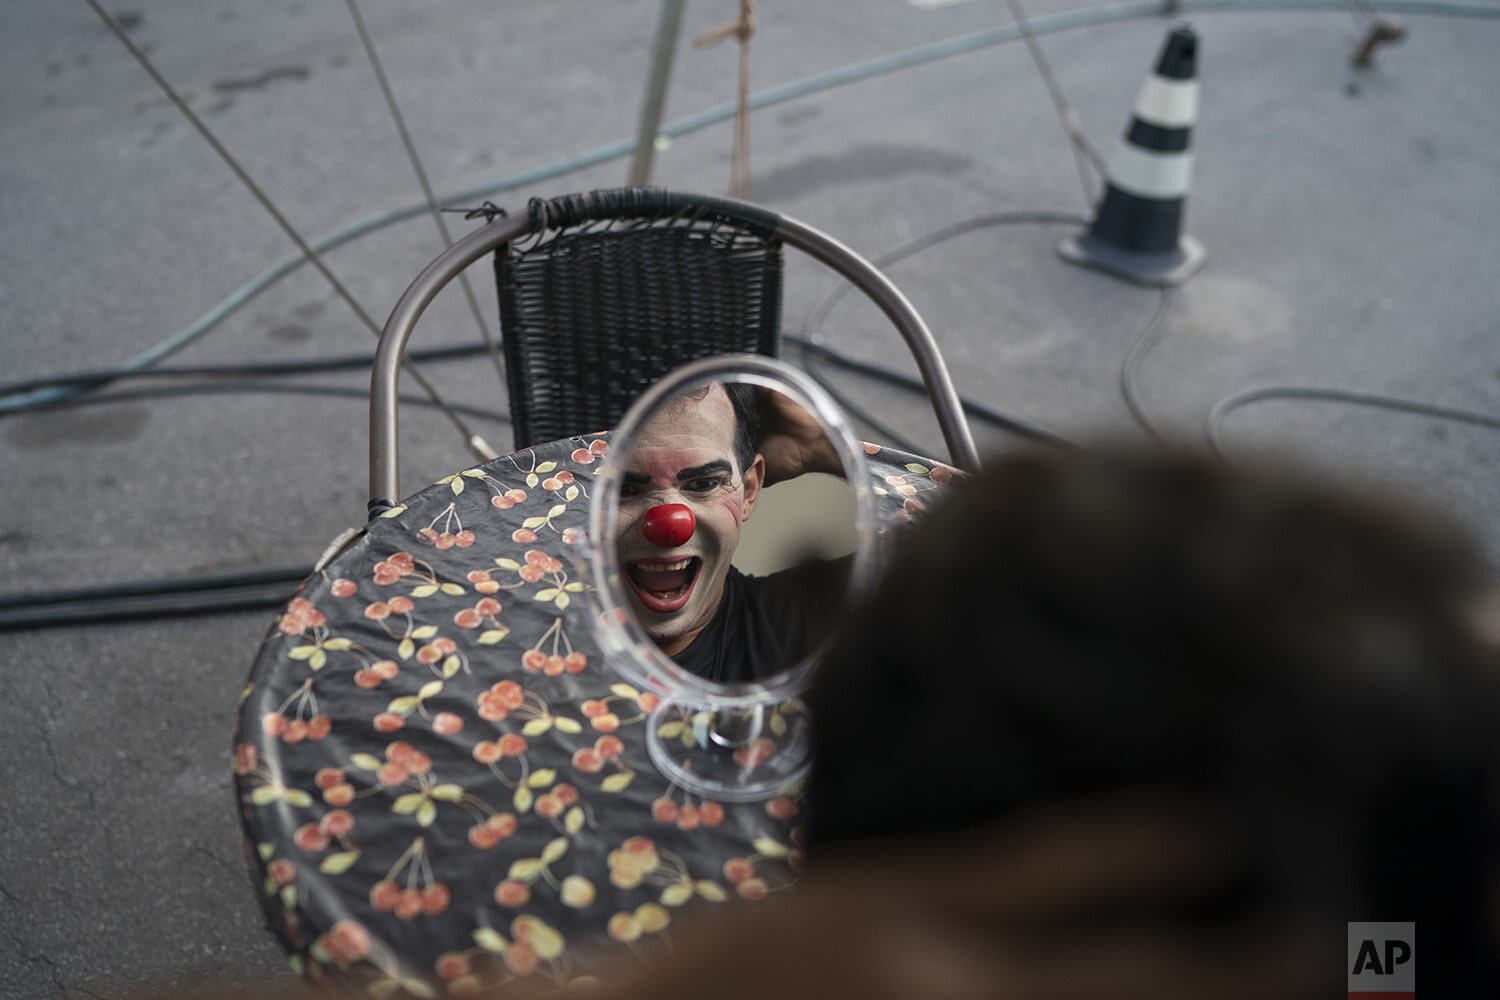  Clown Batatinha, played by Anderson de Souza, makes a face as he puts on his clown face before performing at the Estoril Circus in Itaguai, in greater Rio de Janeiro, Brazil, July 18, 2020. (AP Photo/Leo Correa) 